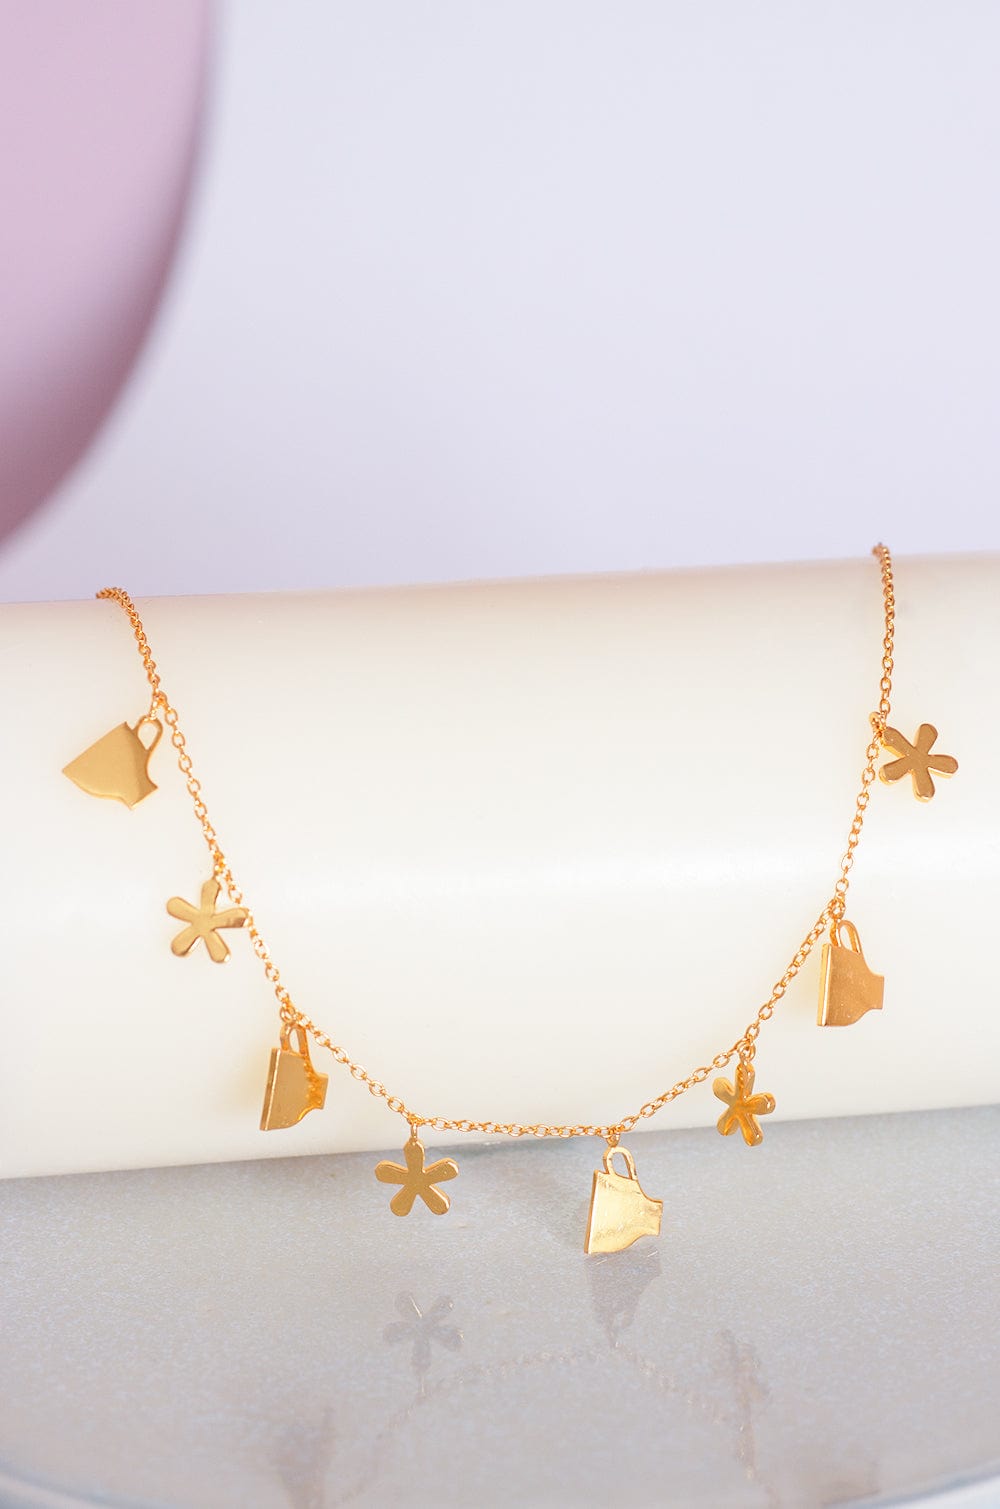 Alice's Tea Party Gold Plated Charm Necklace